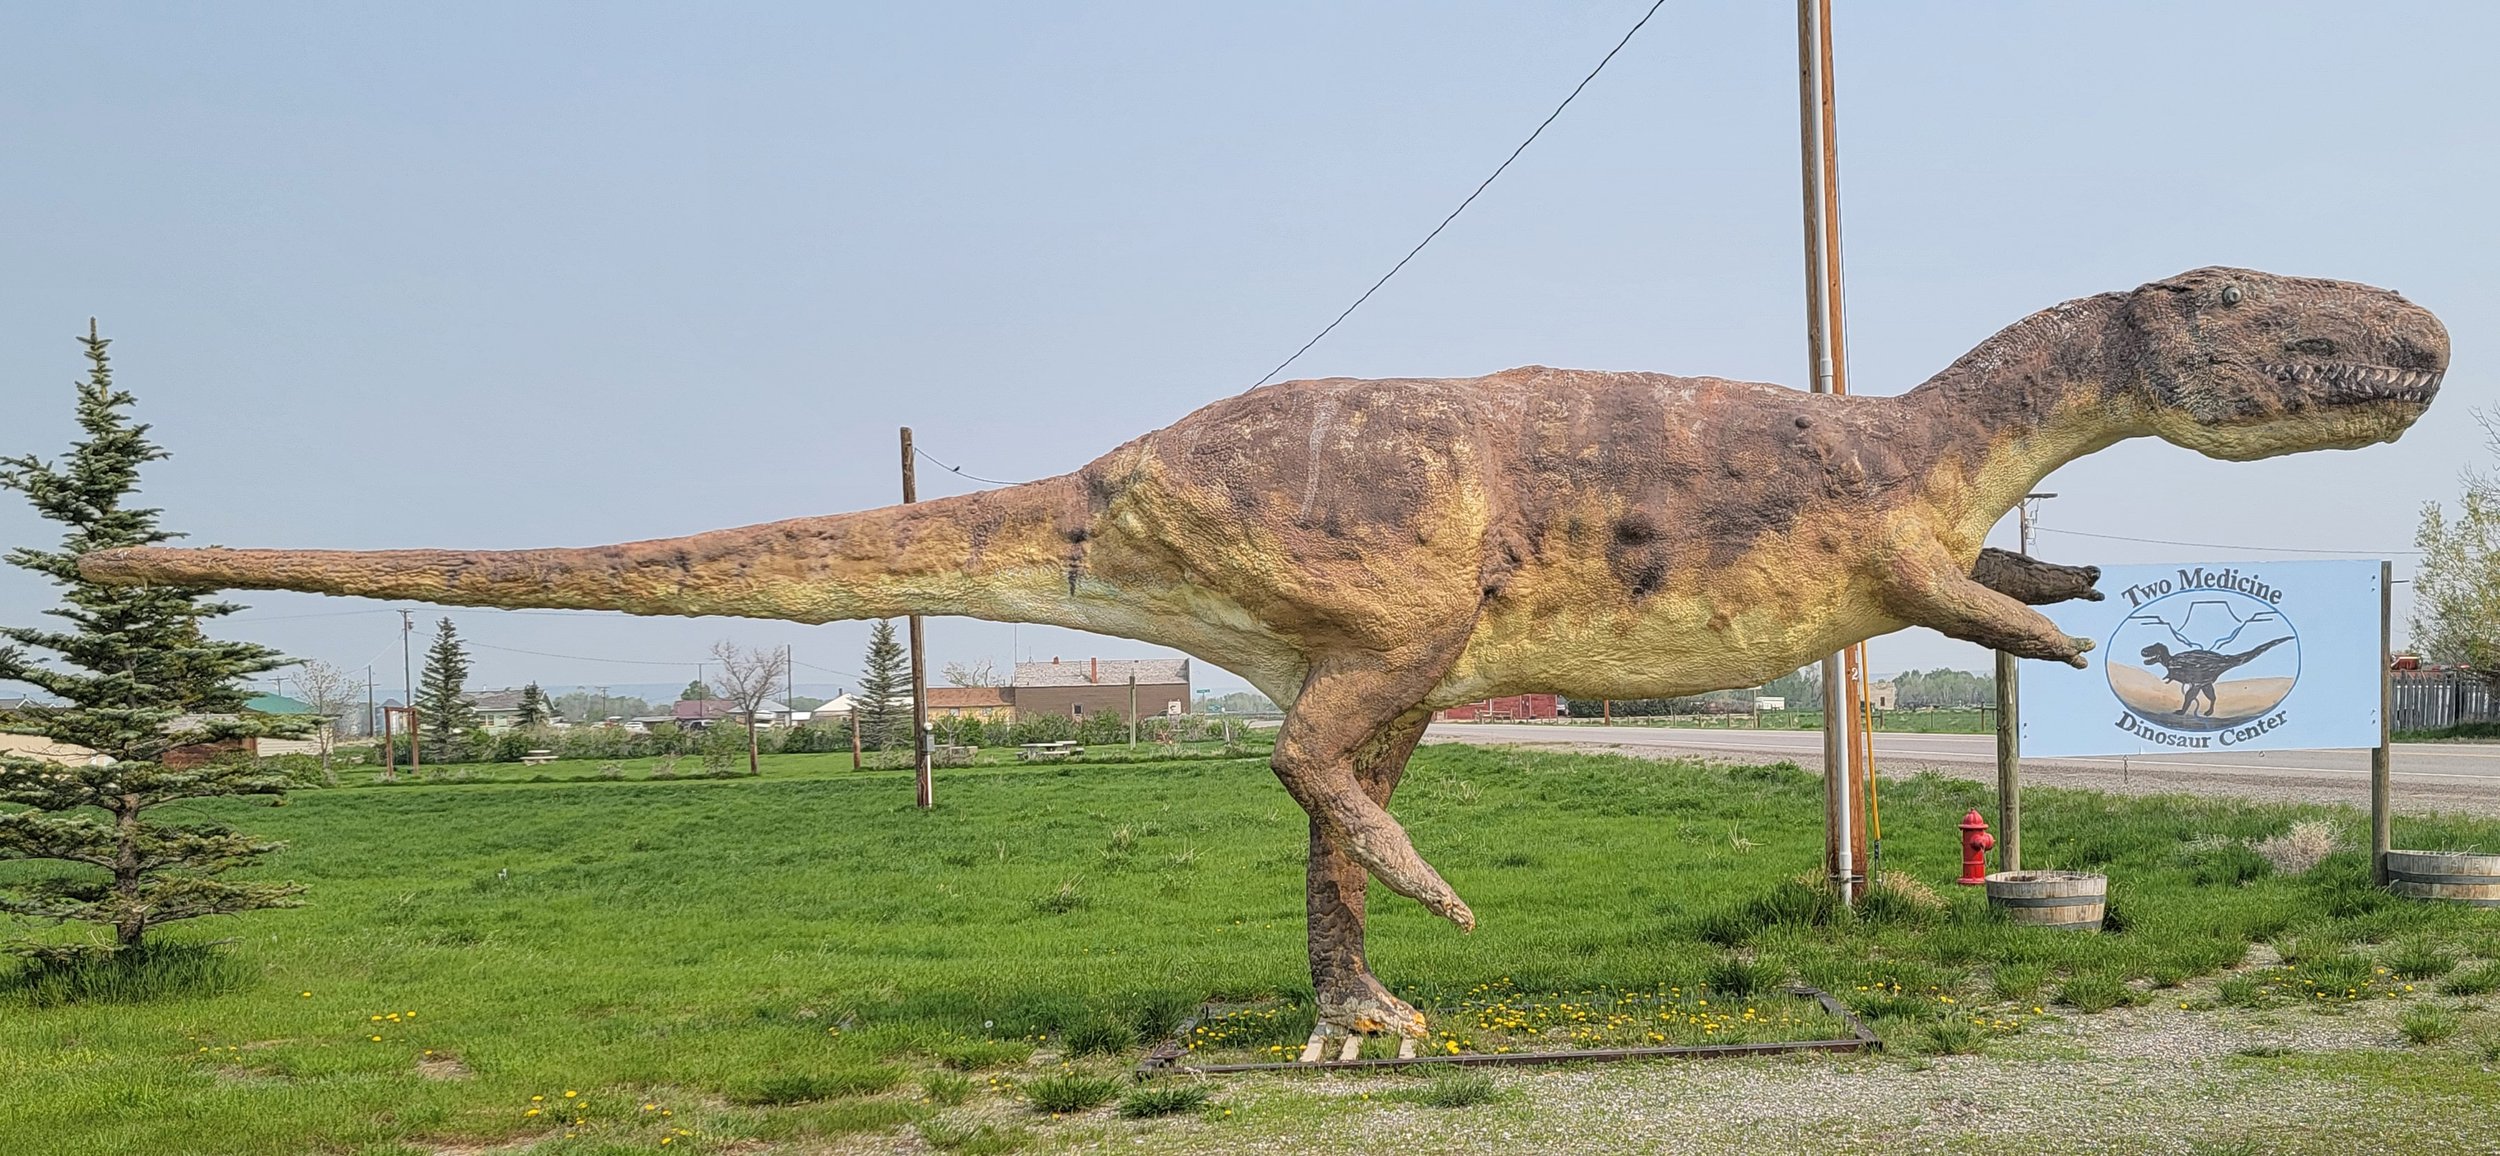 There's the tiniest museum you've ever seen and supposedly a giant dinosaur skeleton inside...